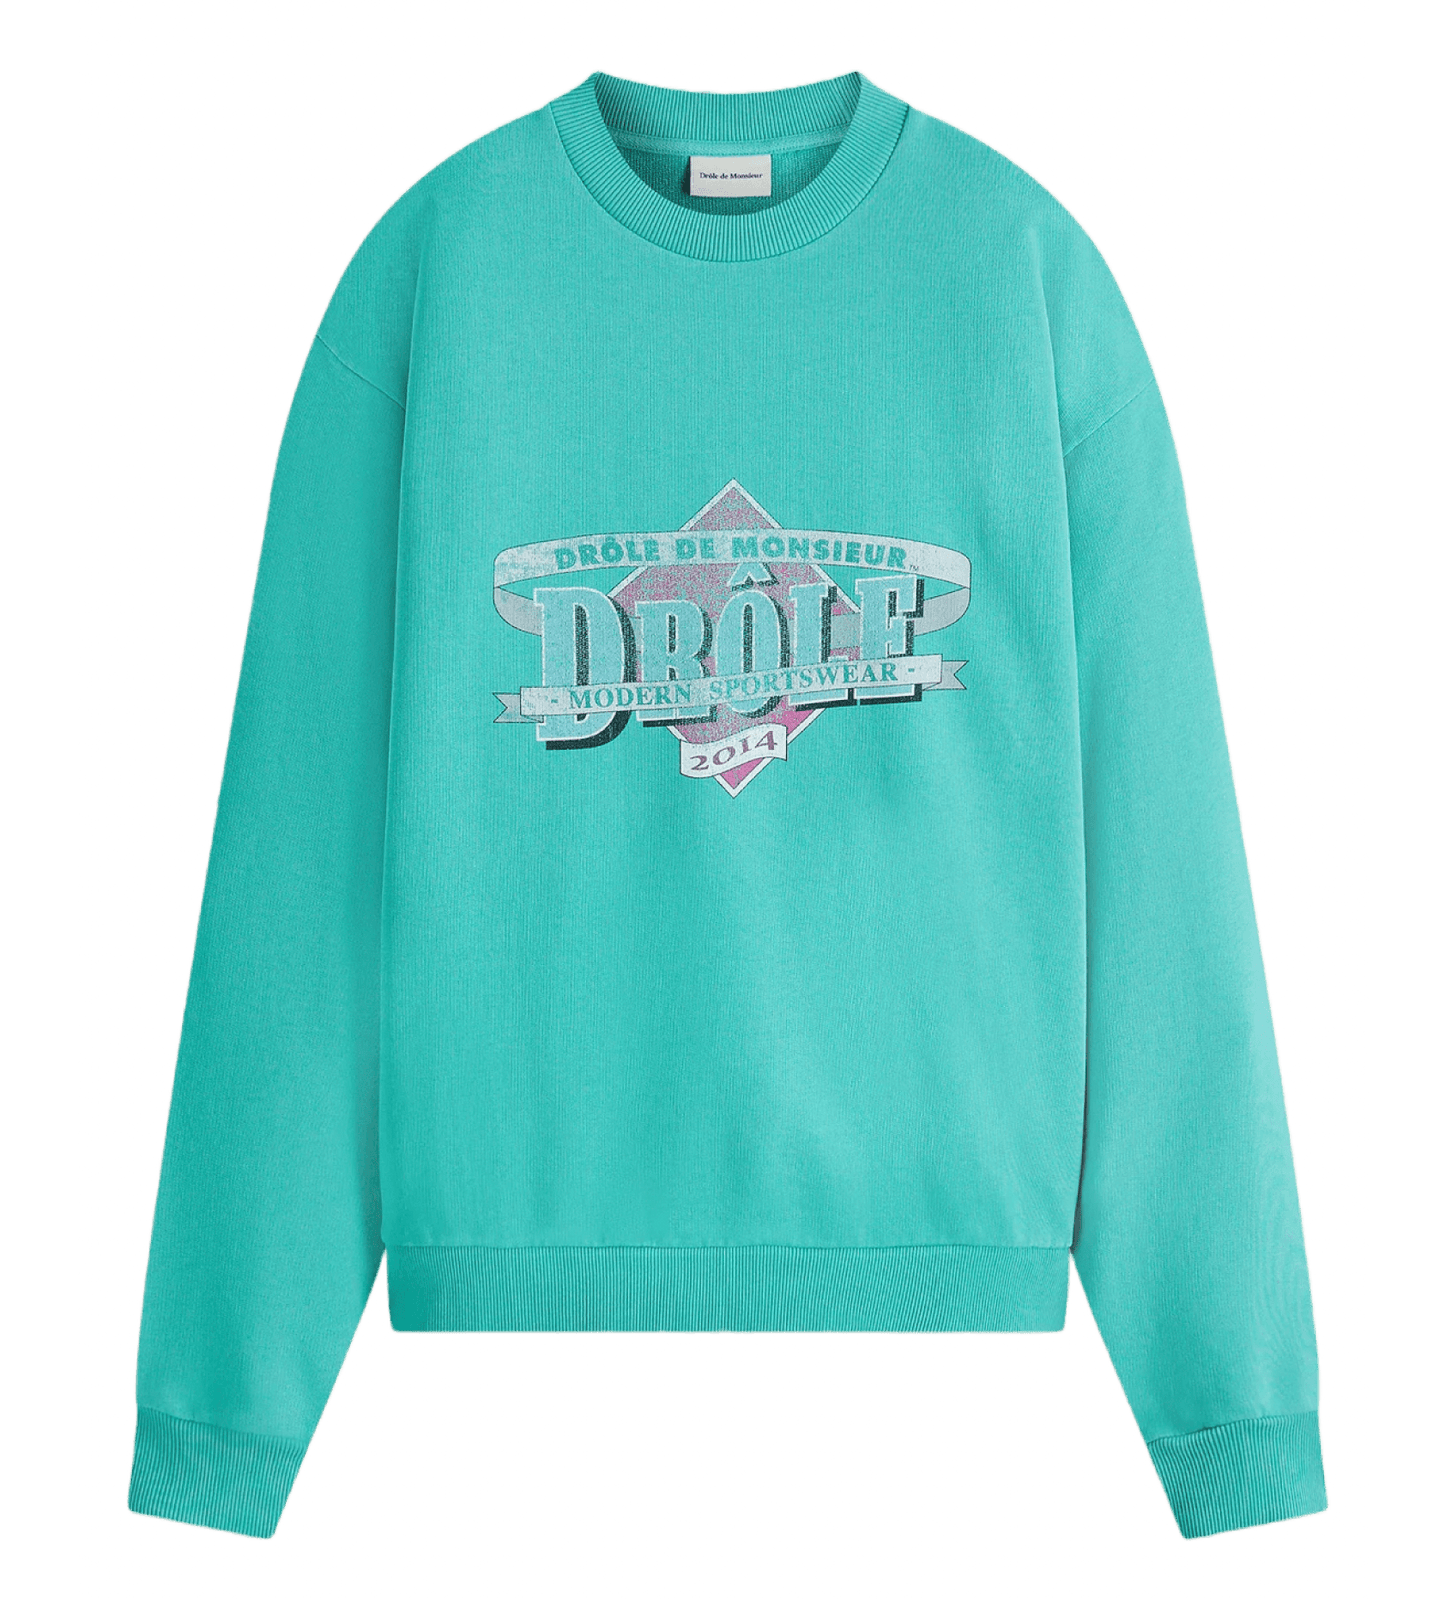 A DROLE DE MONSIEUR sweatshirt made from French terry fabric with a print logo on it.